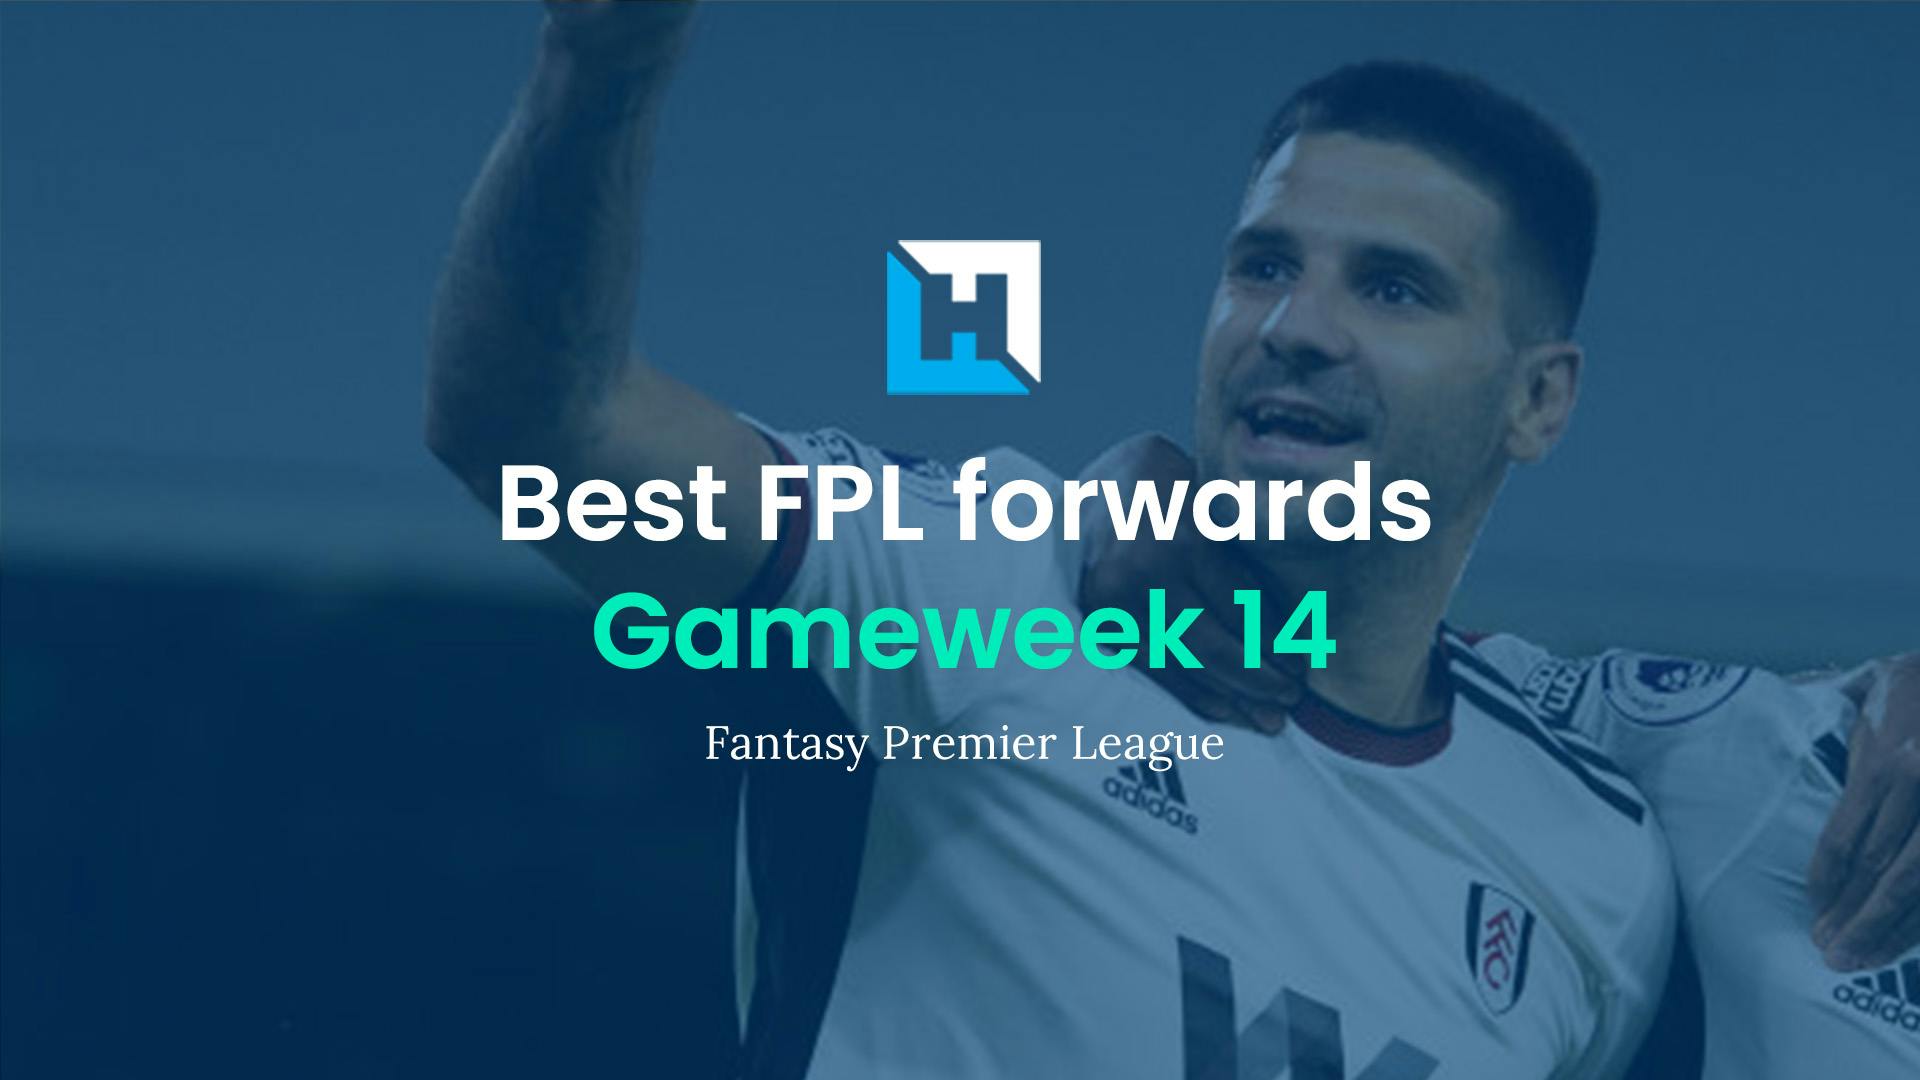 Best FPL players for Gameweek 14: Top 5 best forwards